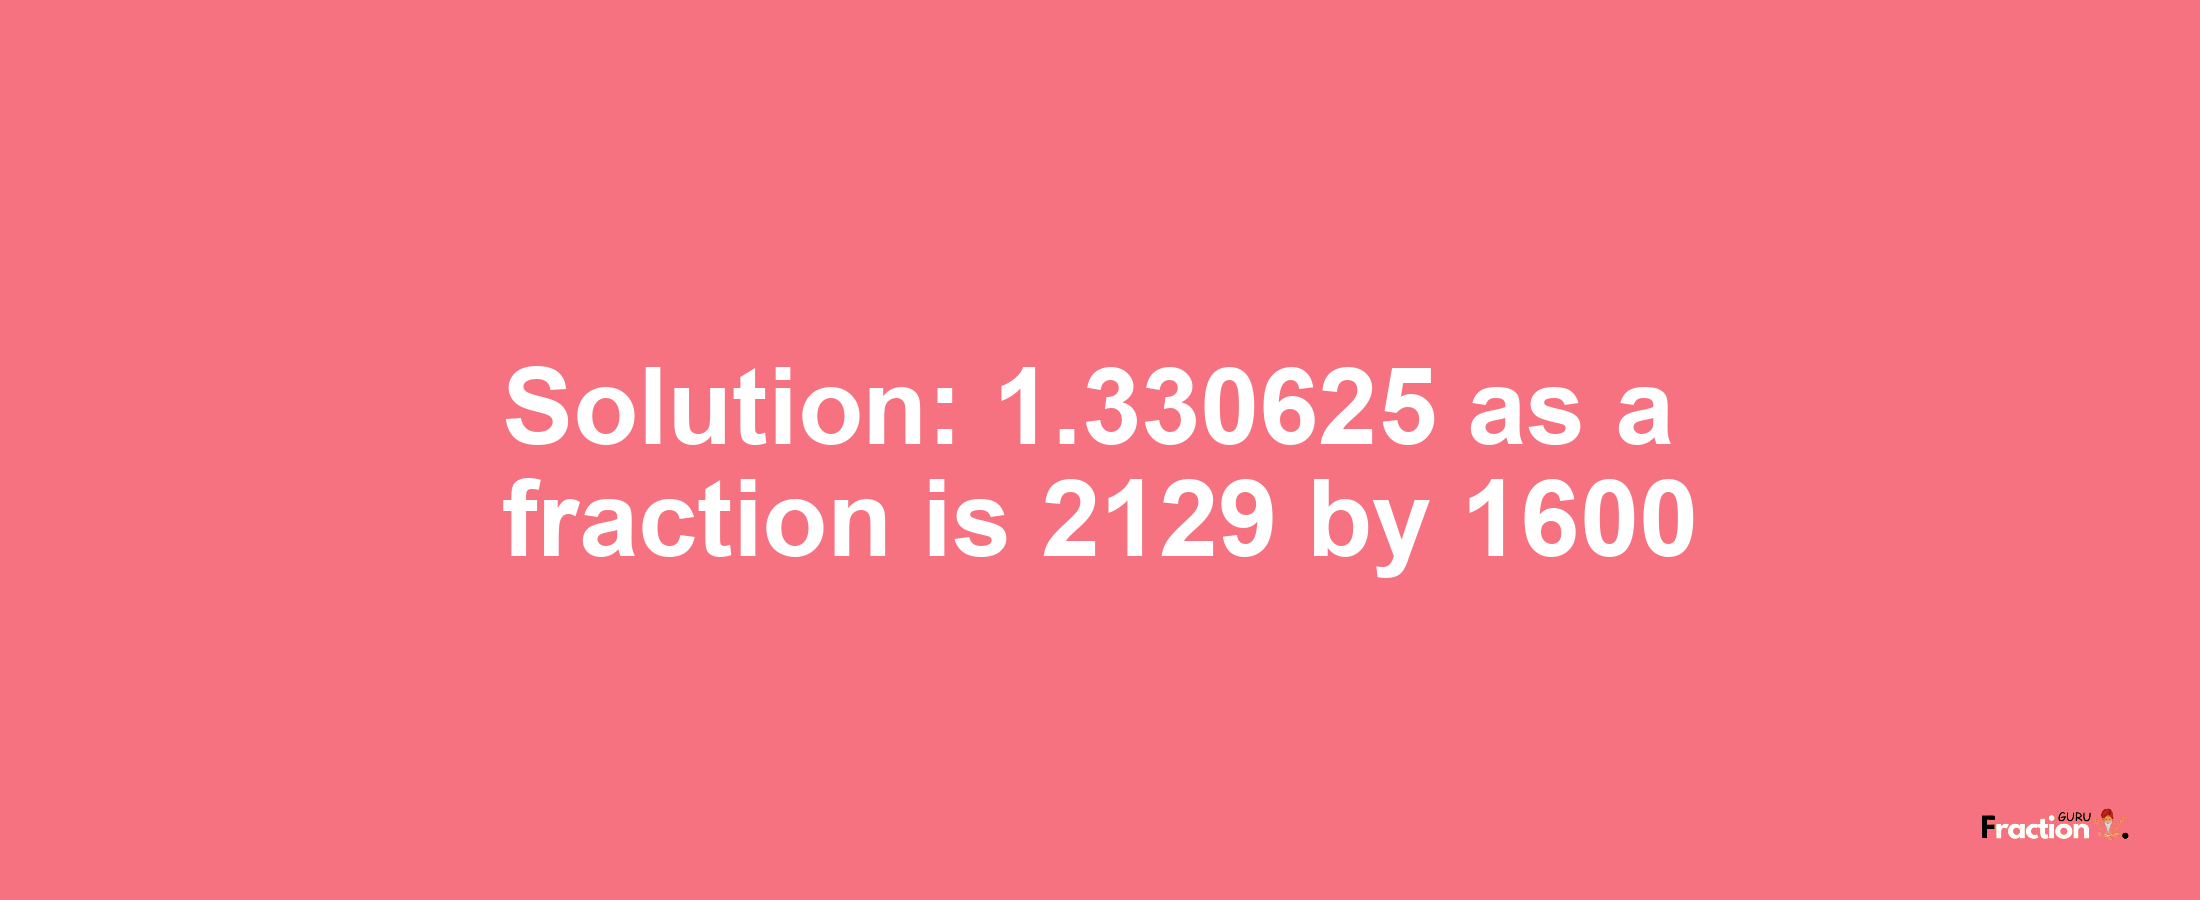 Solution:1.330625 as a fraction is 2129/1600